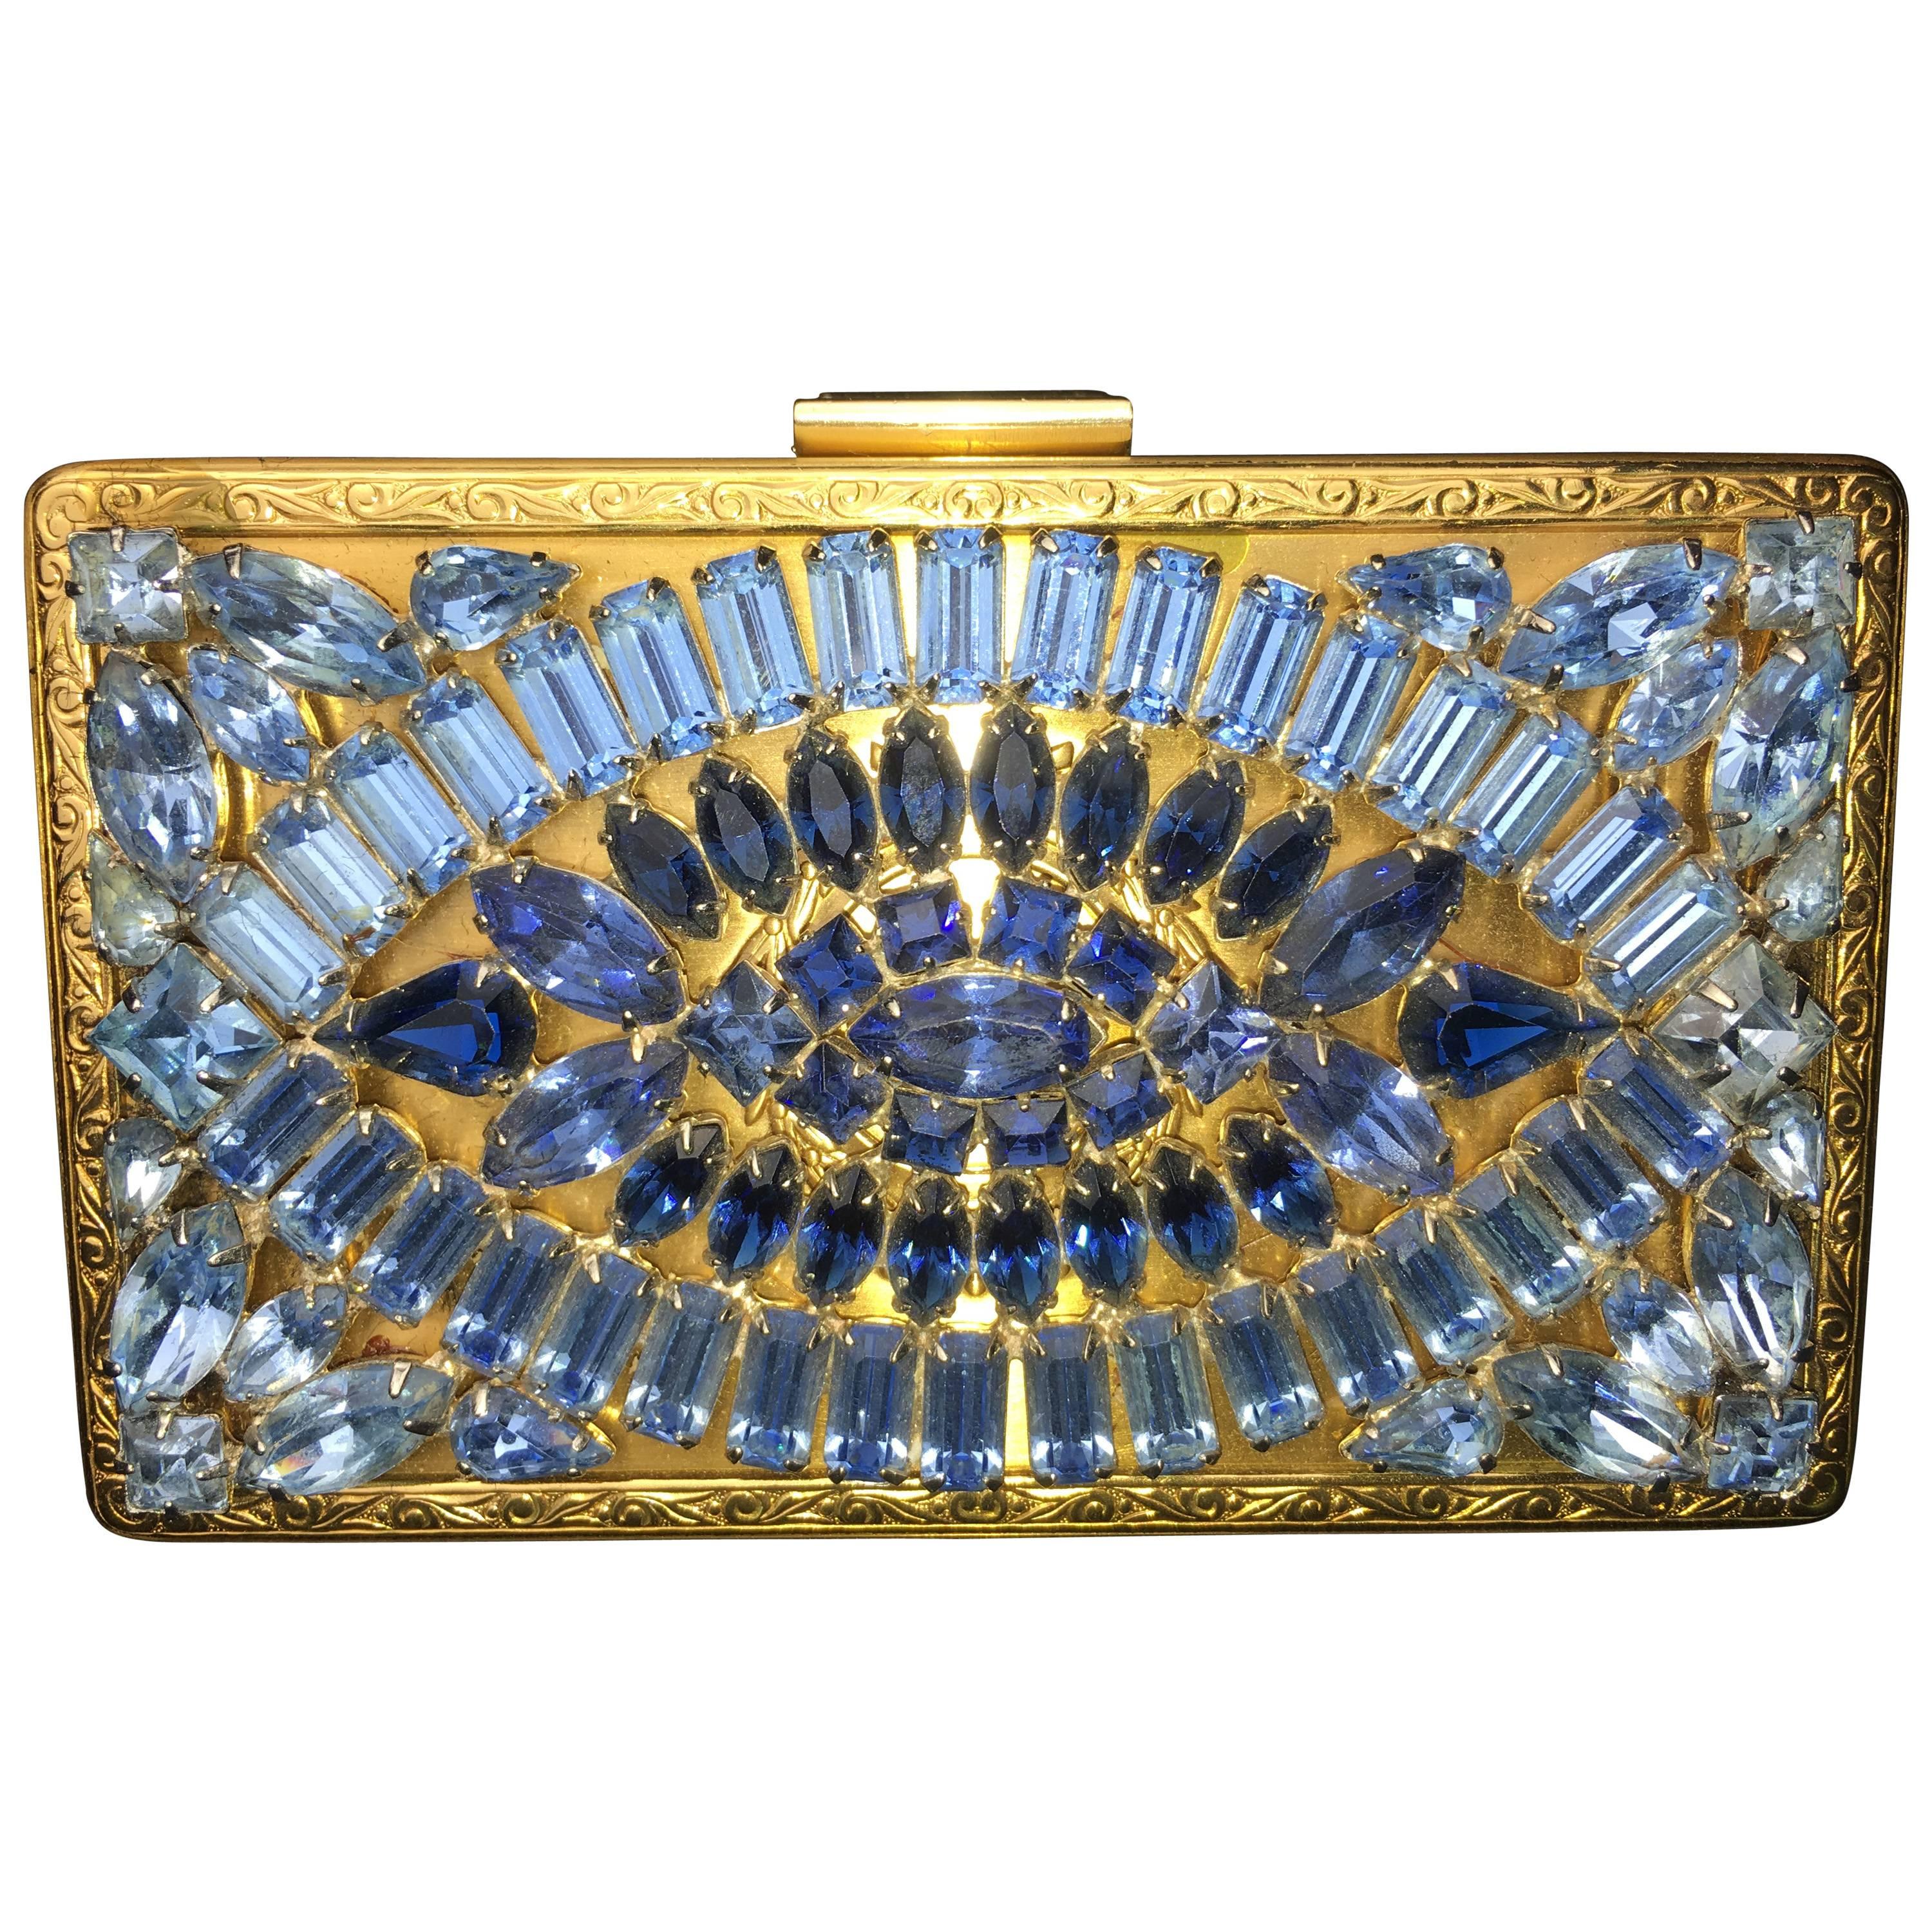 Gorgeous Surrealistic 1950's Evening Bag by Elgin American.